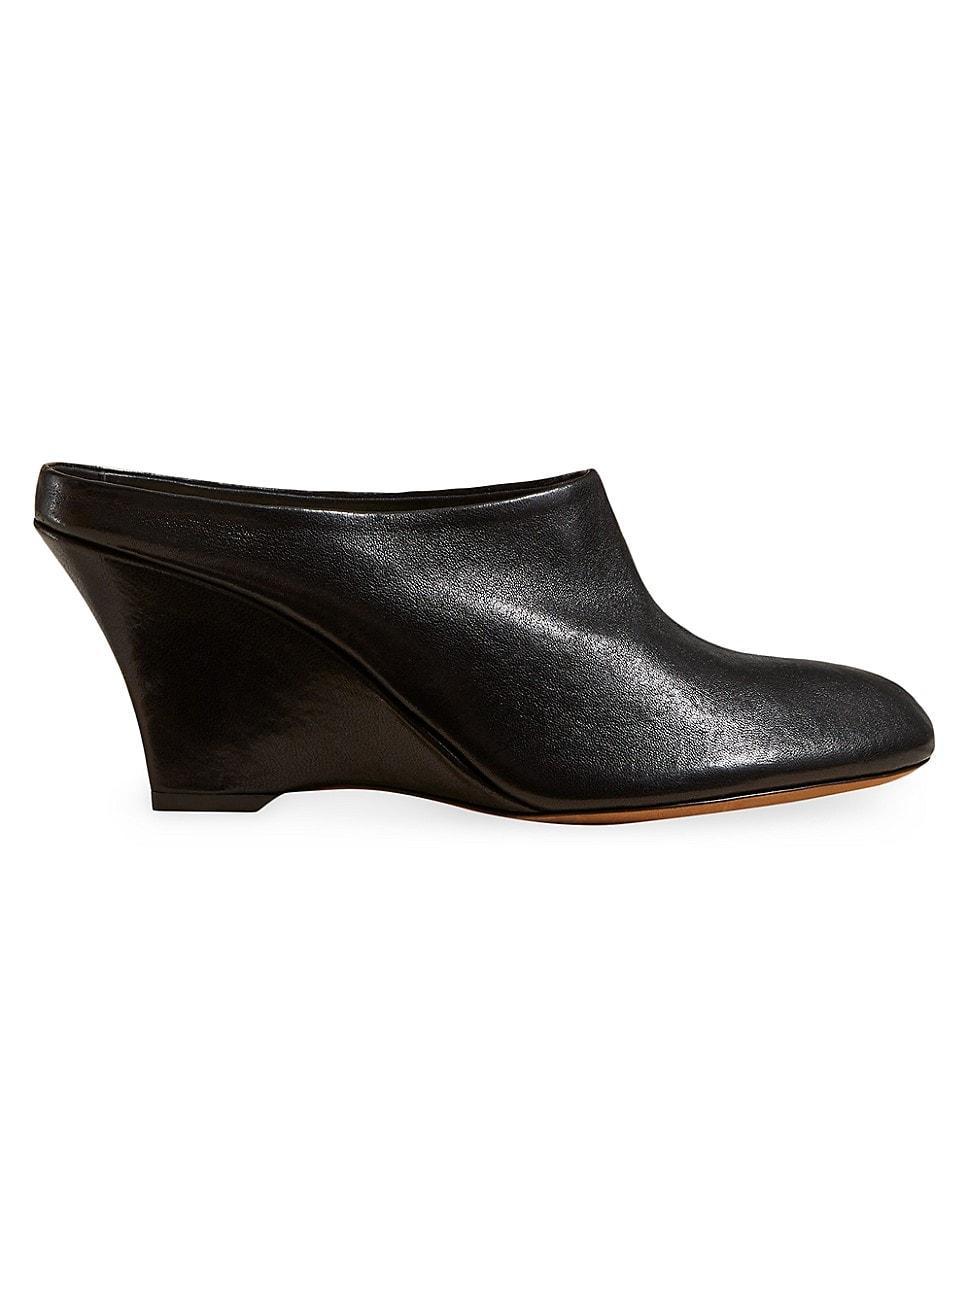 Womens Apollo Leather Wedge Mules Product Image